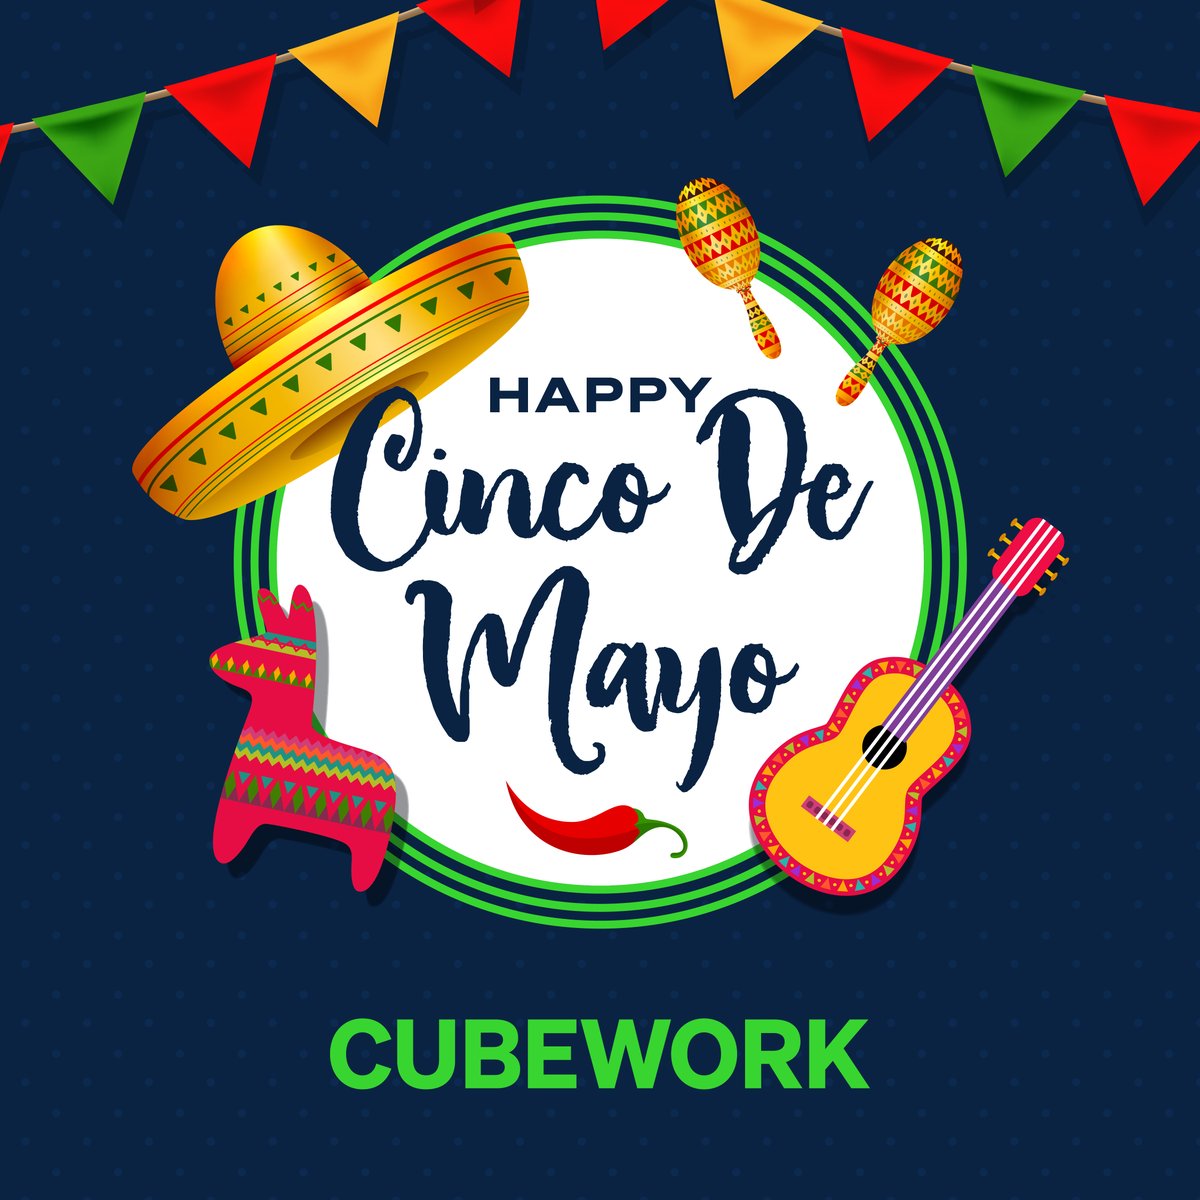 Cubework wishes you a day filled with joy, color, and celebration! Embrace the spirit of Cinco de Mayo with music, laughter, and delicious food. Raise a glass and dance the night away. Here's to heritage, unity, and endless fiesta vibes! #CincoDeMayo #Cubework #CelebrateCulture